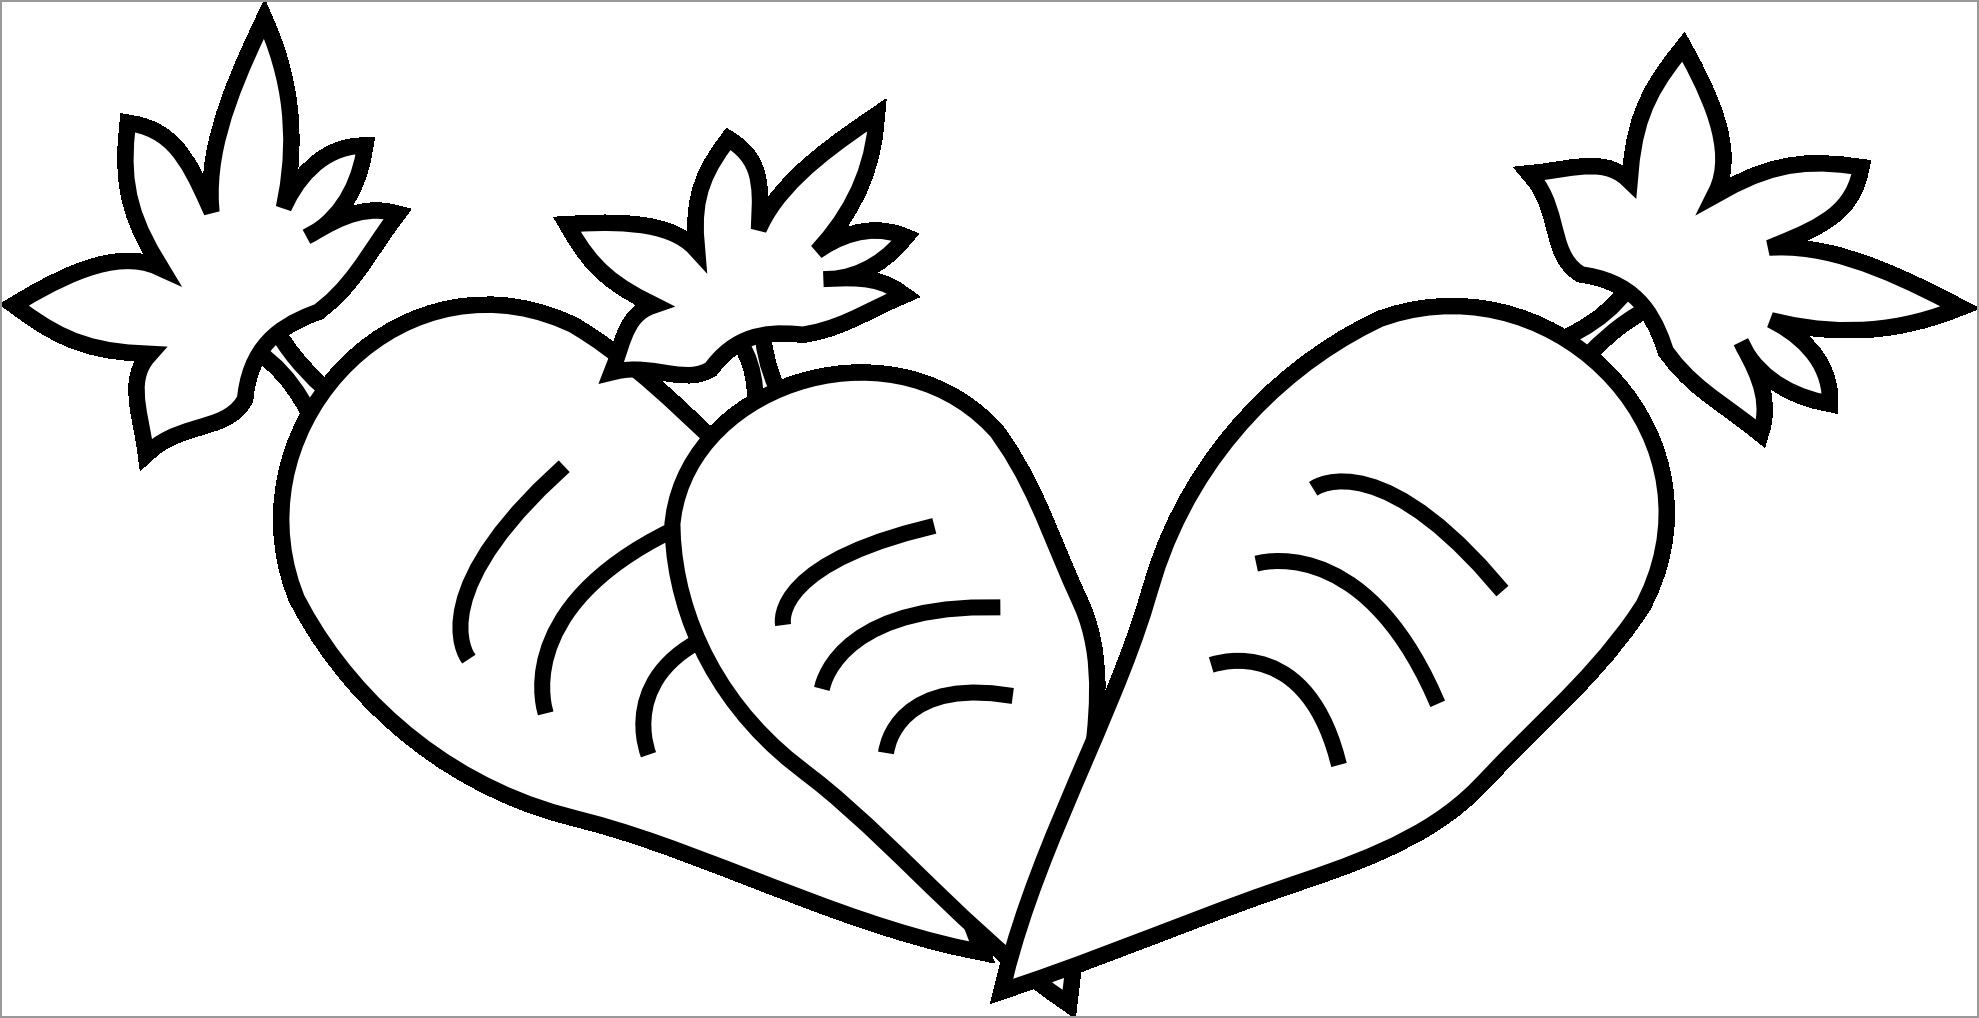 Cute Carrot Coloring Page for Kids